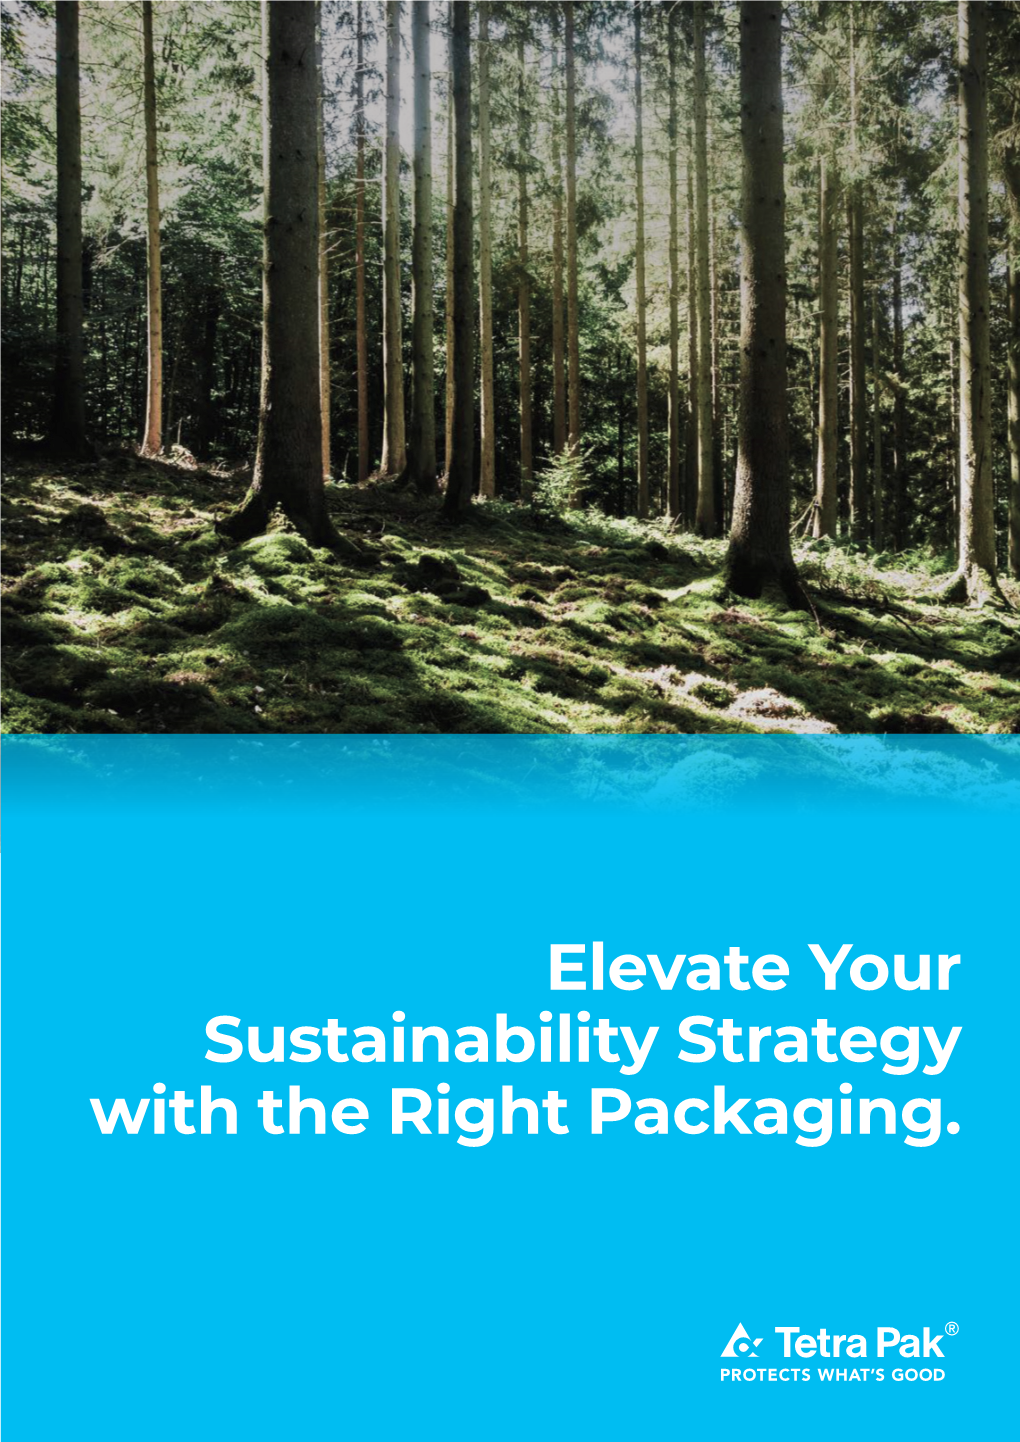 Elevate Your Sustainability Strategy with the Right Packaging